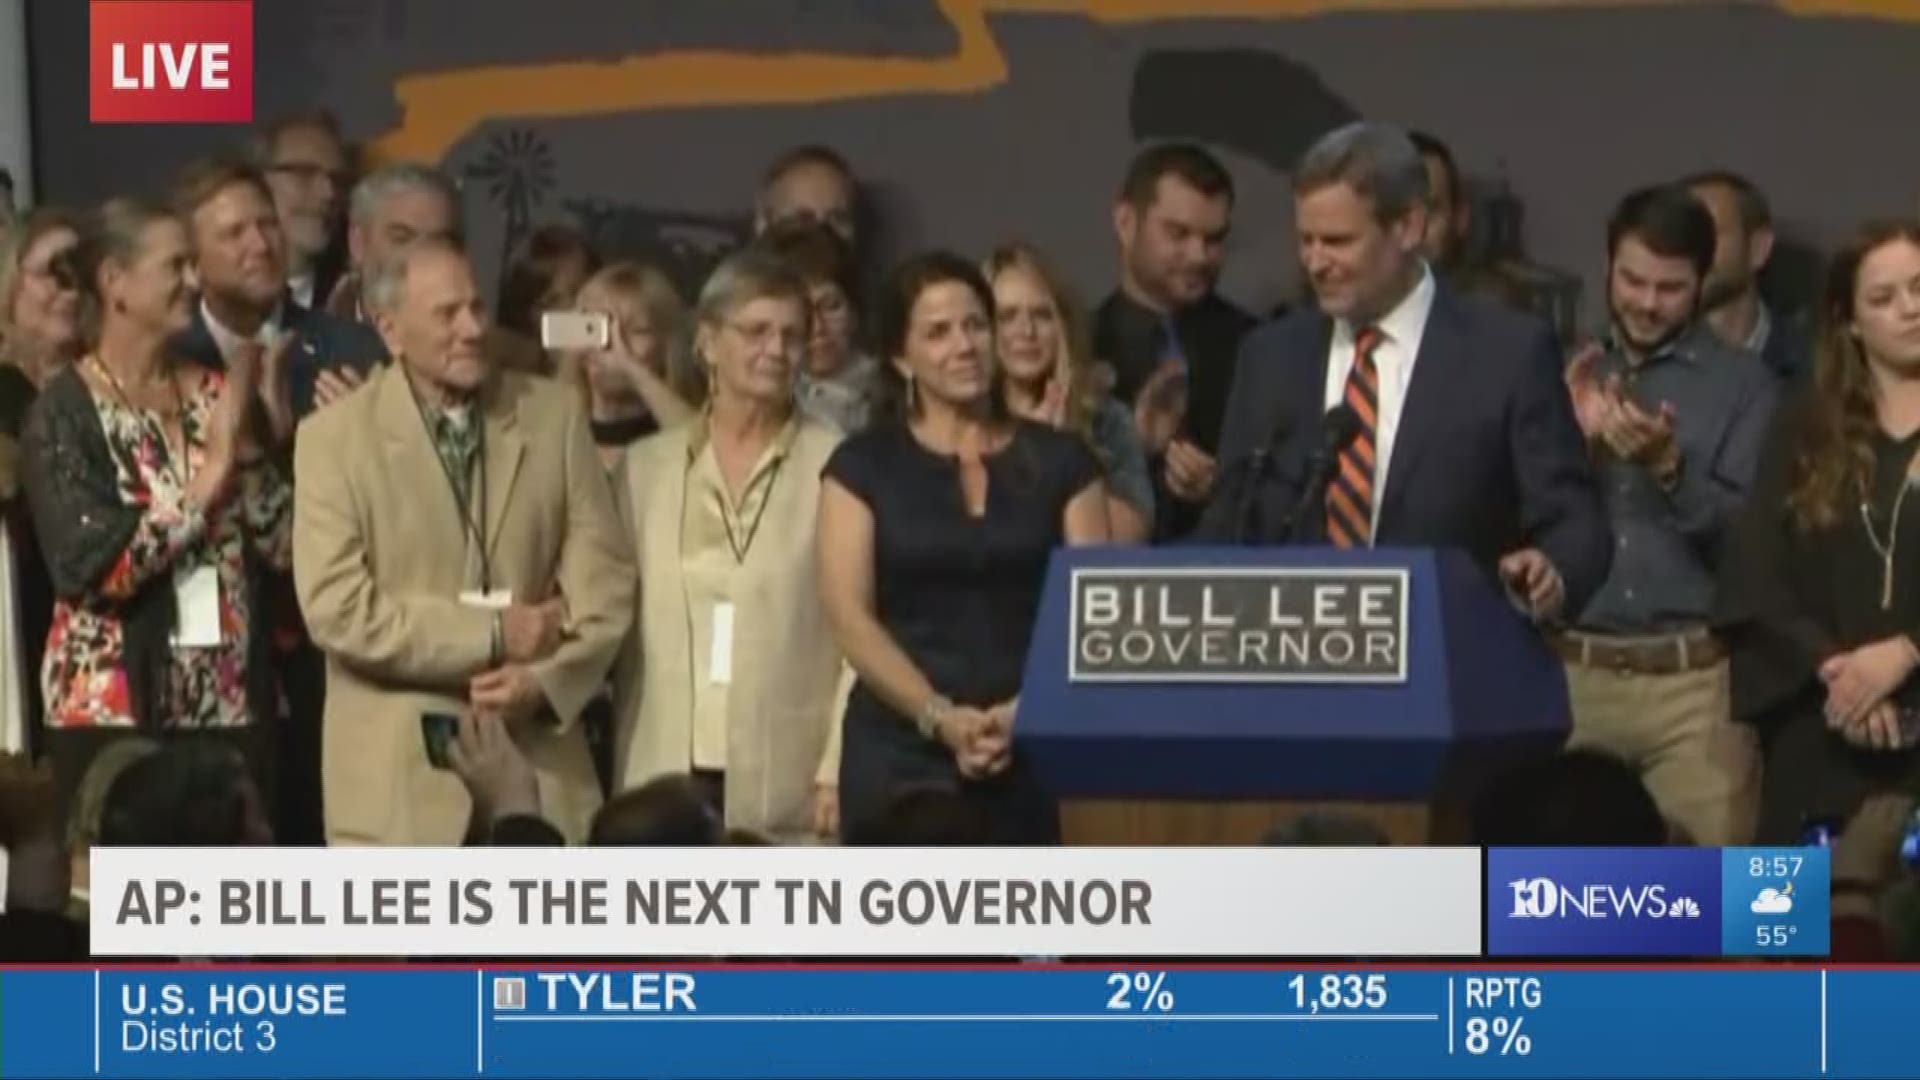 The Republican took the stage in front of supporters amid early projections by multiple outlets he will be the next TN governor